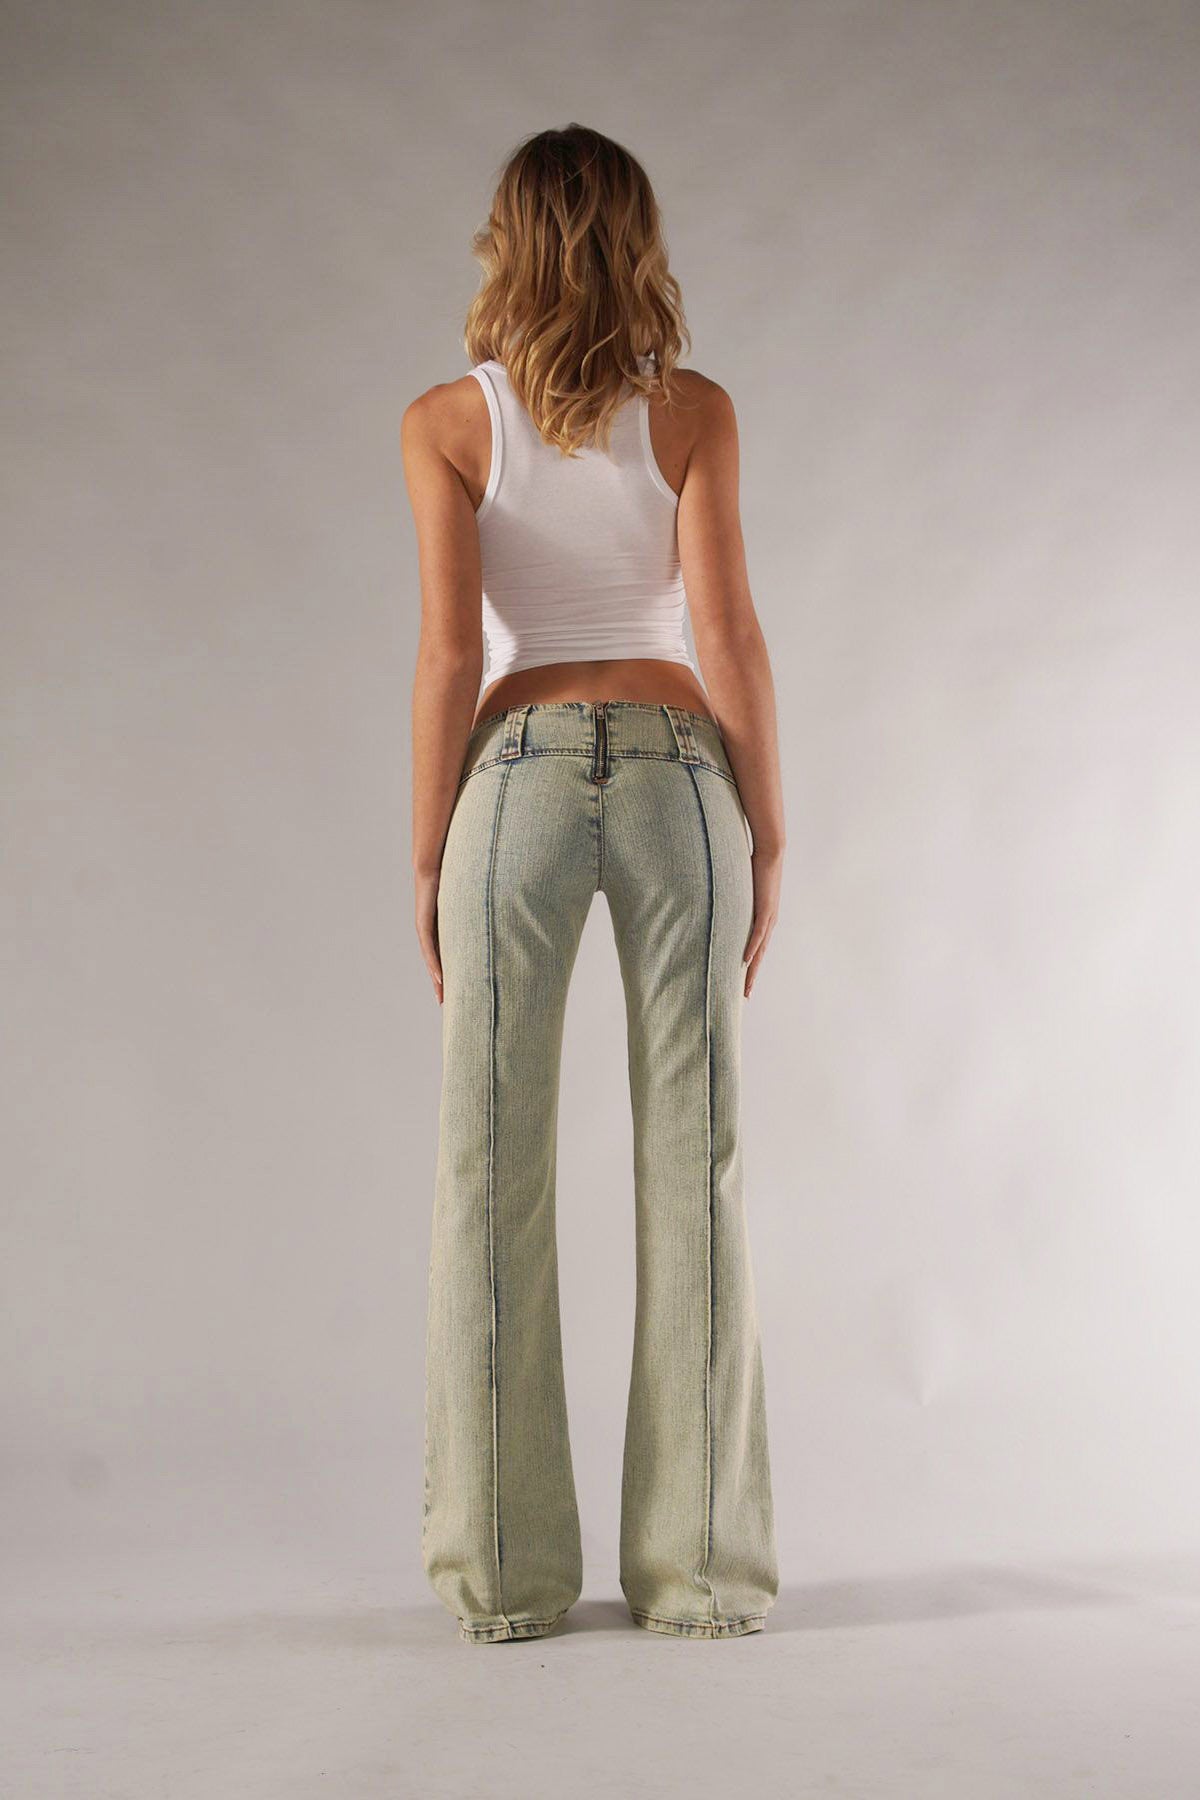 The Kate Pant / Blue Obsession